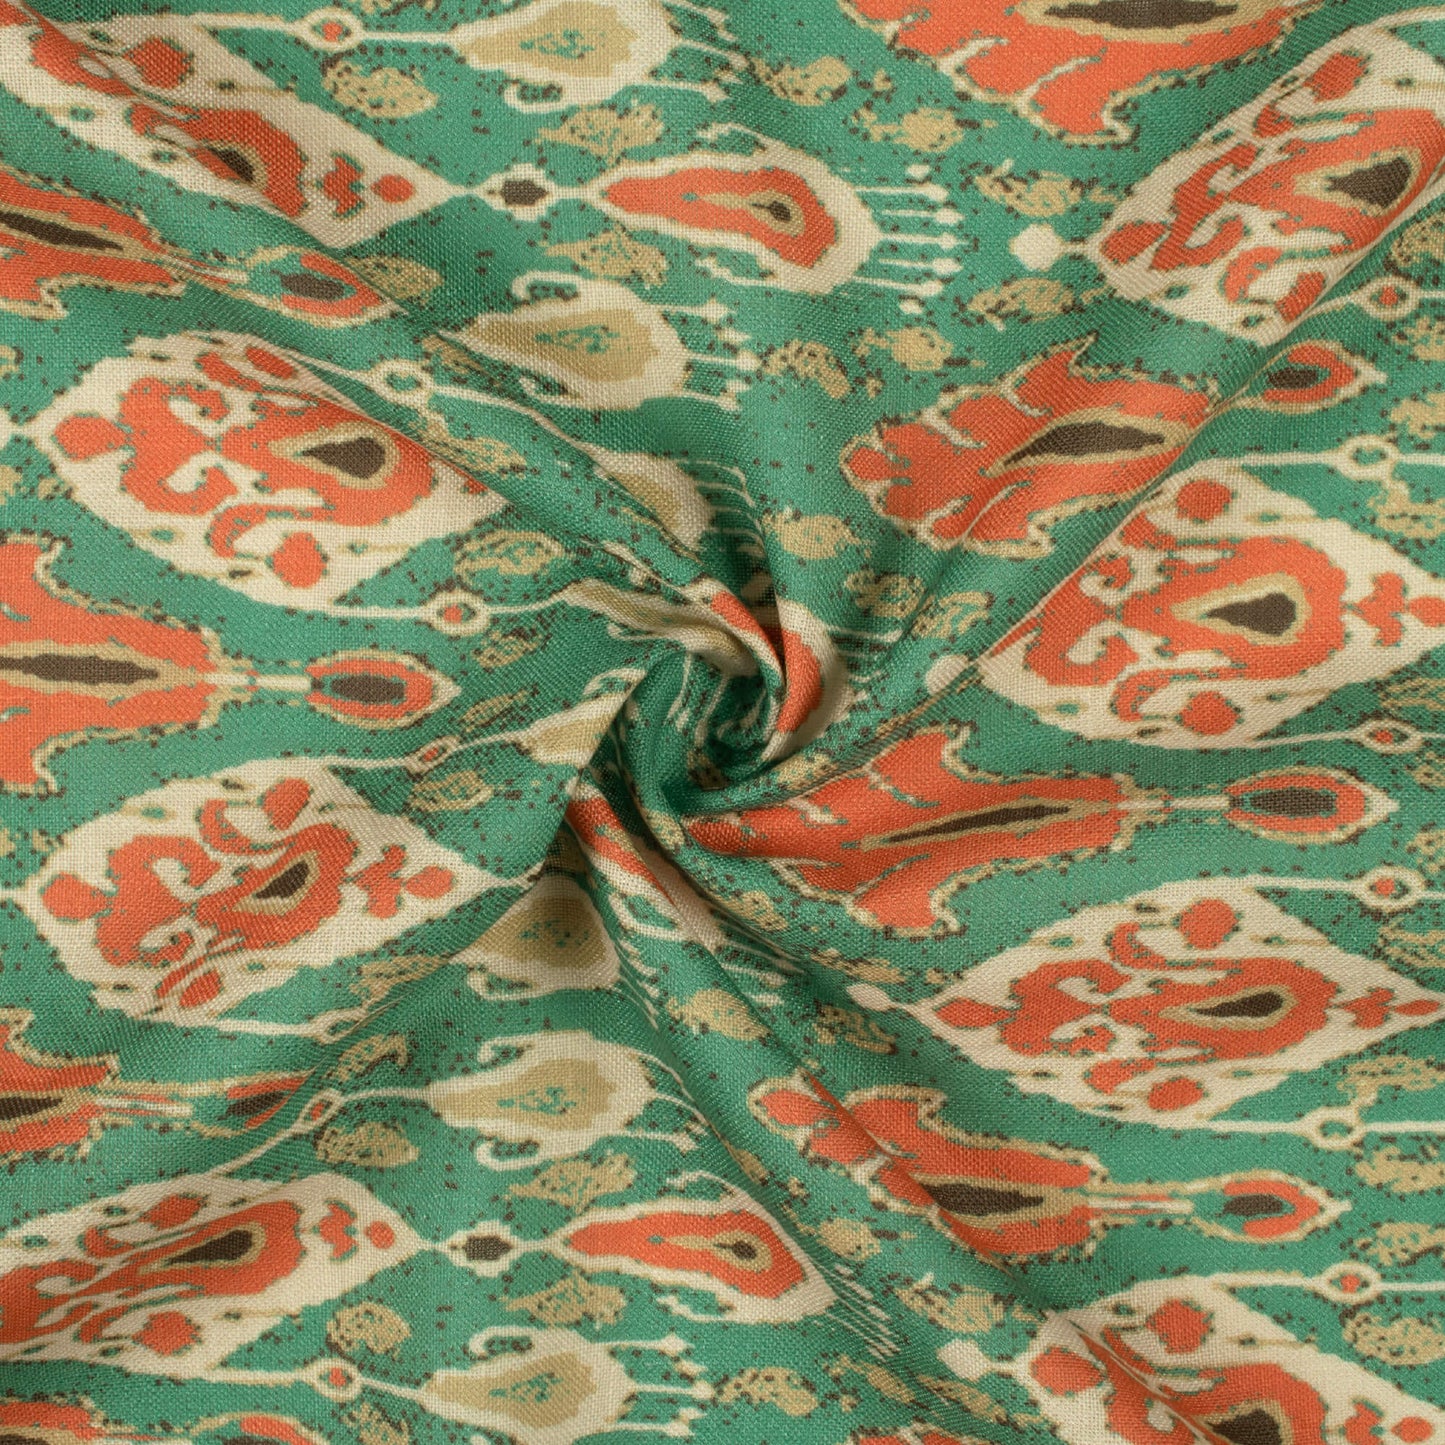 Middle Green And Coral Orange Ethnic Pattern Digital Print Linen Textured Fabric (Width 56 Inches)